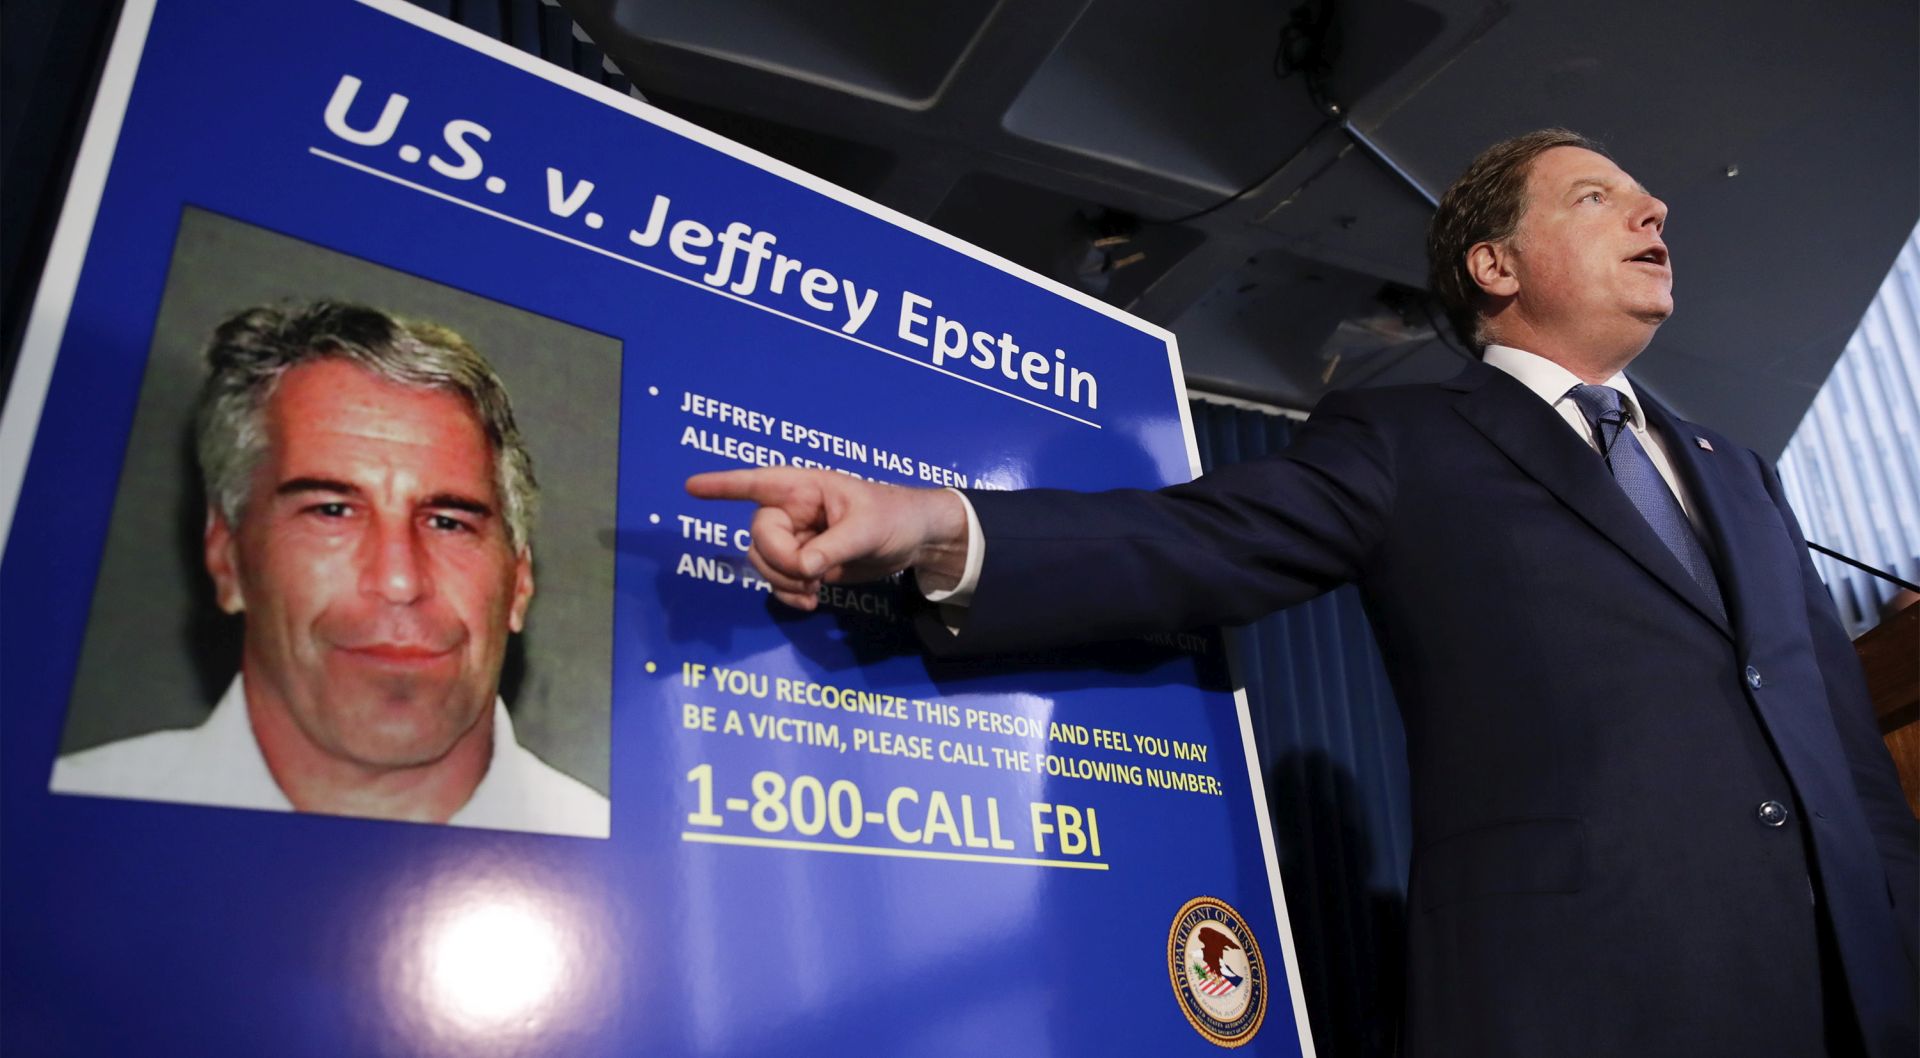 epa07766214 (FILE) - United States Attorney for the Southern District of New York Geoffrey Berman (R) points as he speaks during a news conference about the arrest of American financier Jeffrey Epstein in New York, USA, 08 July 2019 (reissued 10 August 2019). US media reported that Epstein was found dead in his prison cell on 10 August 2019 morning in the MCC Manhattan while awaiting trial on sex trafficking charges. An official confirmation by authorities of his death is pending.  EPA/JASON SZENES